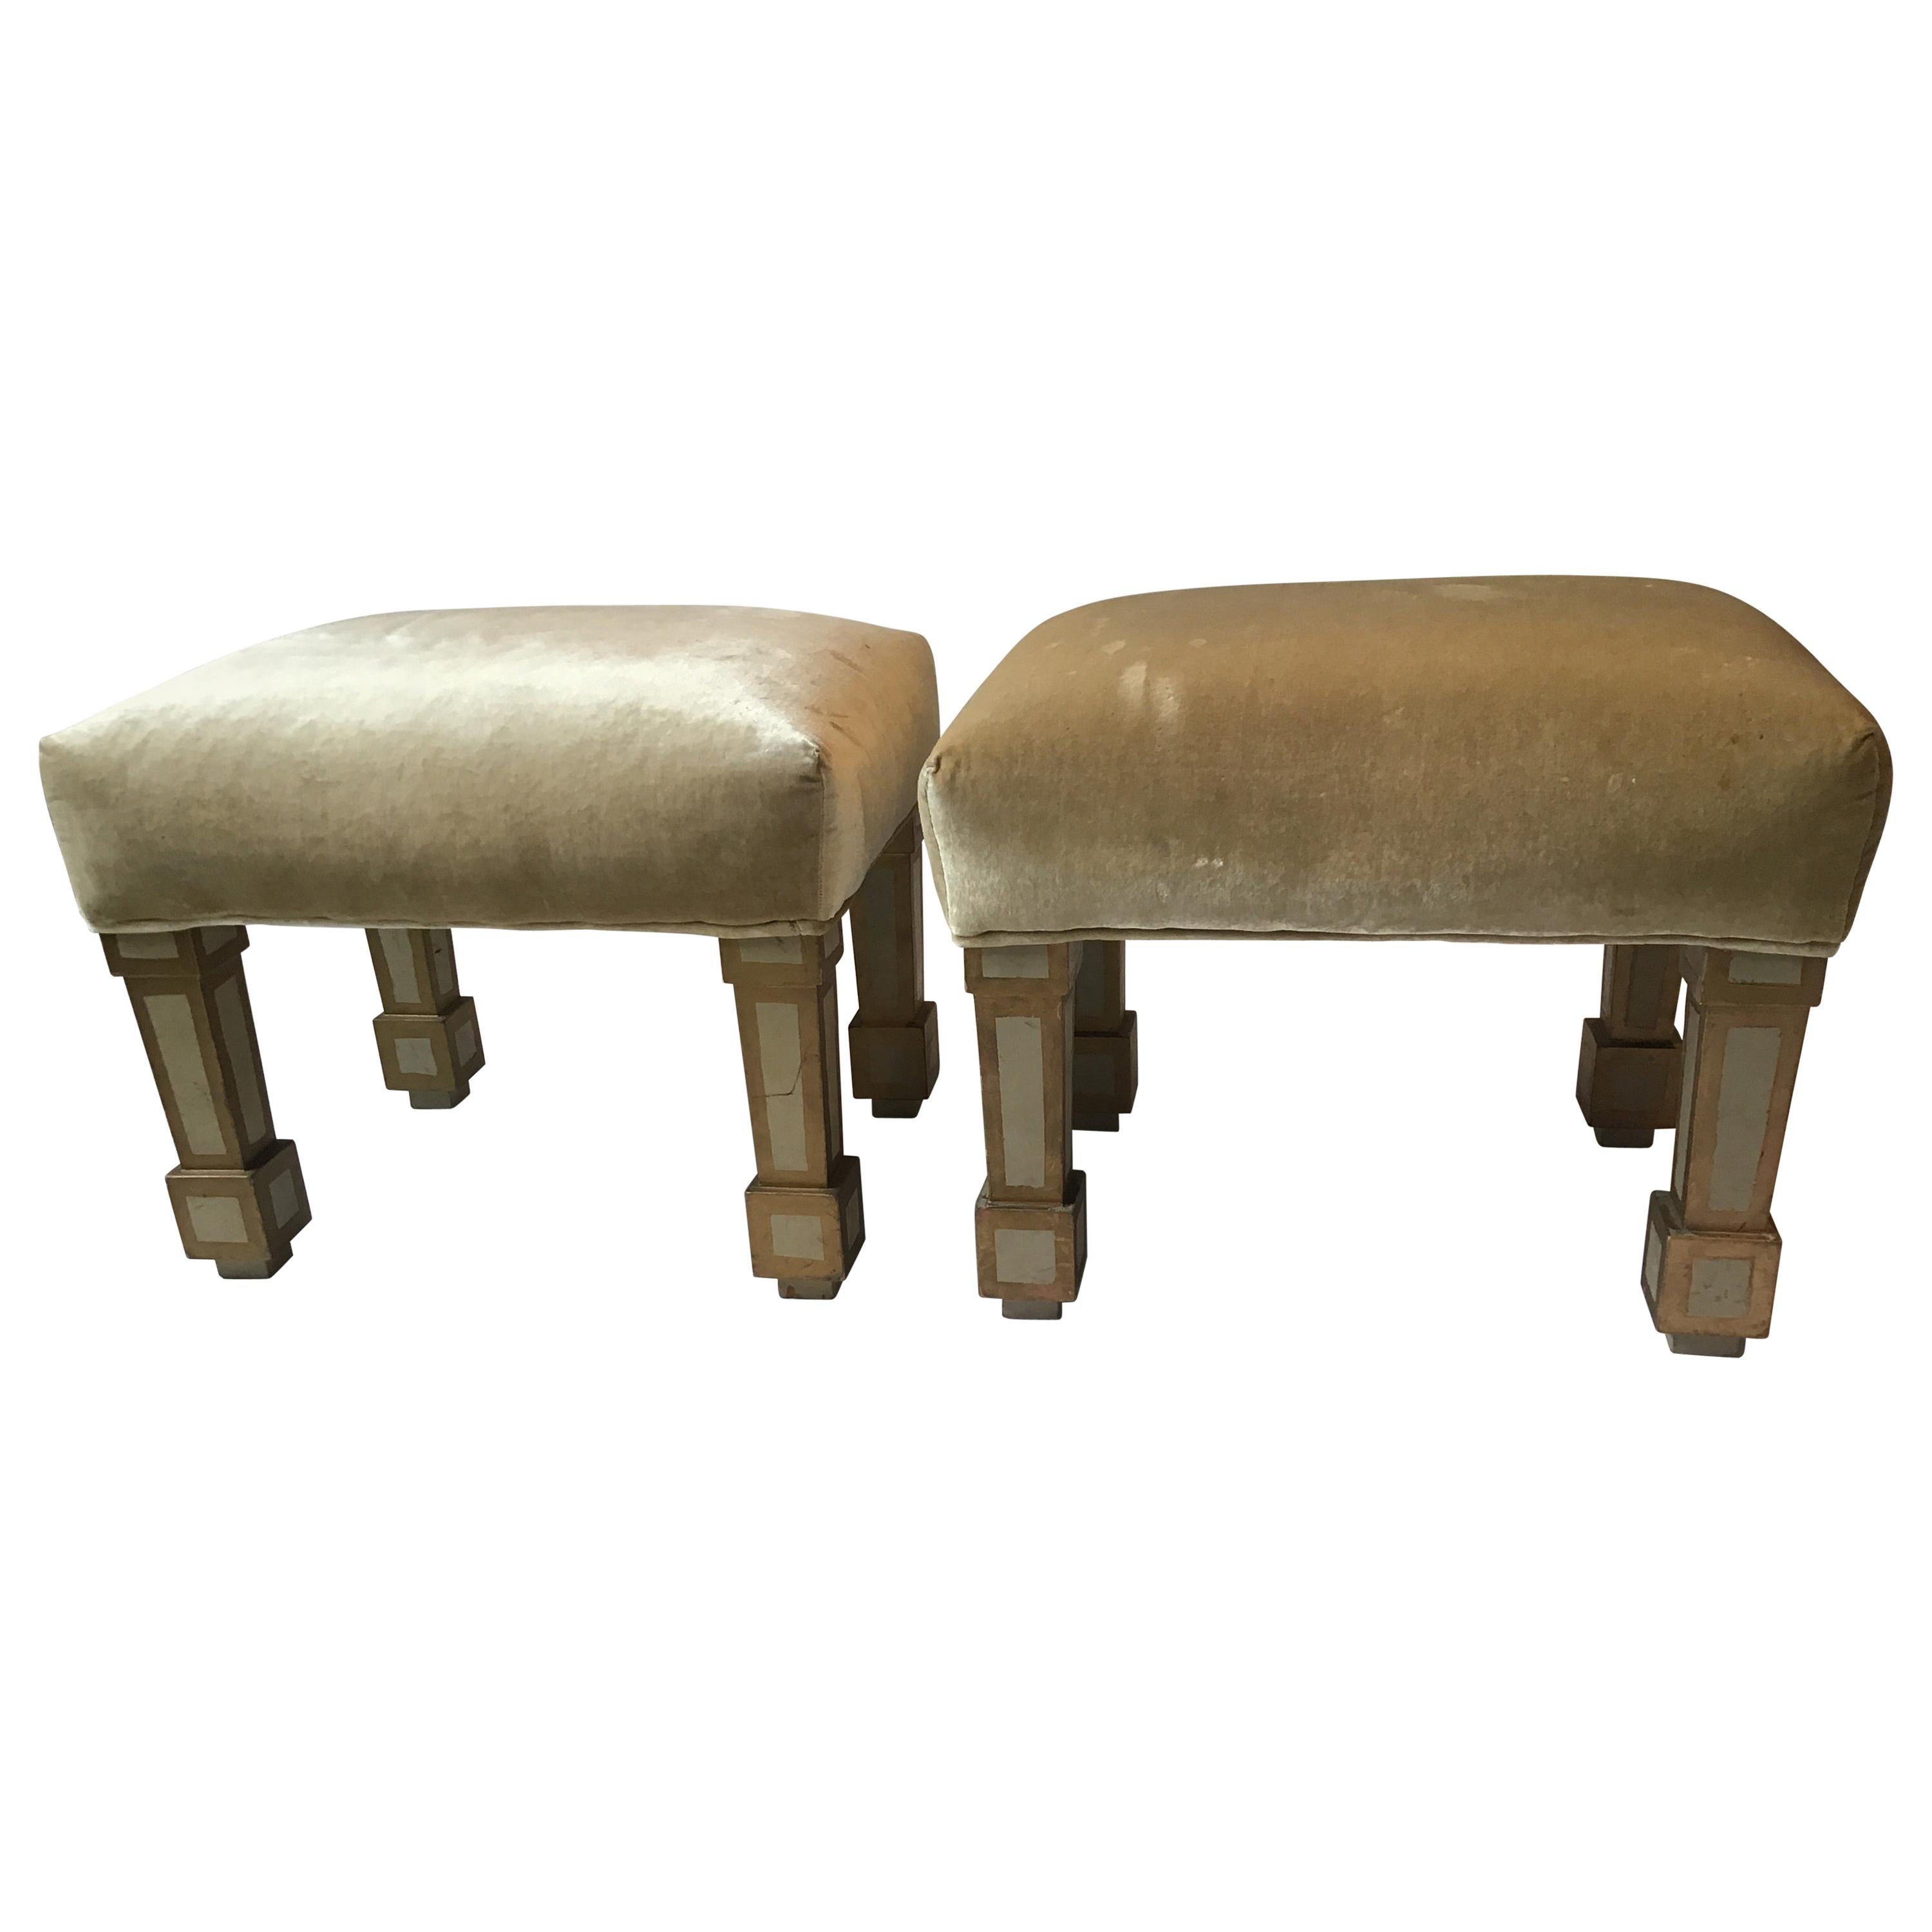 Pair of Wooden Leg Ottomans For Sale